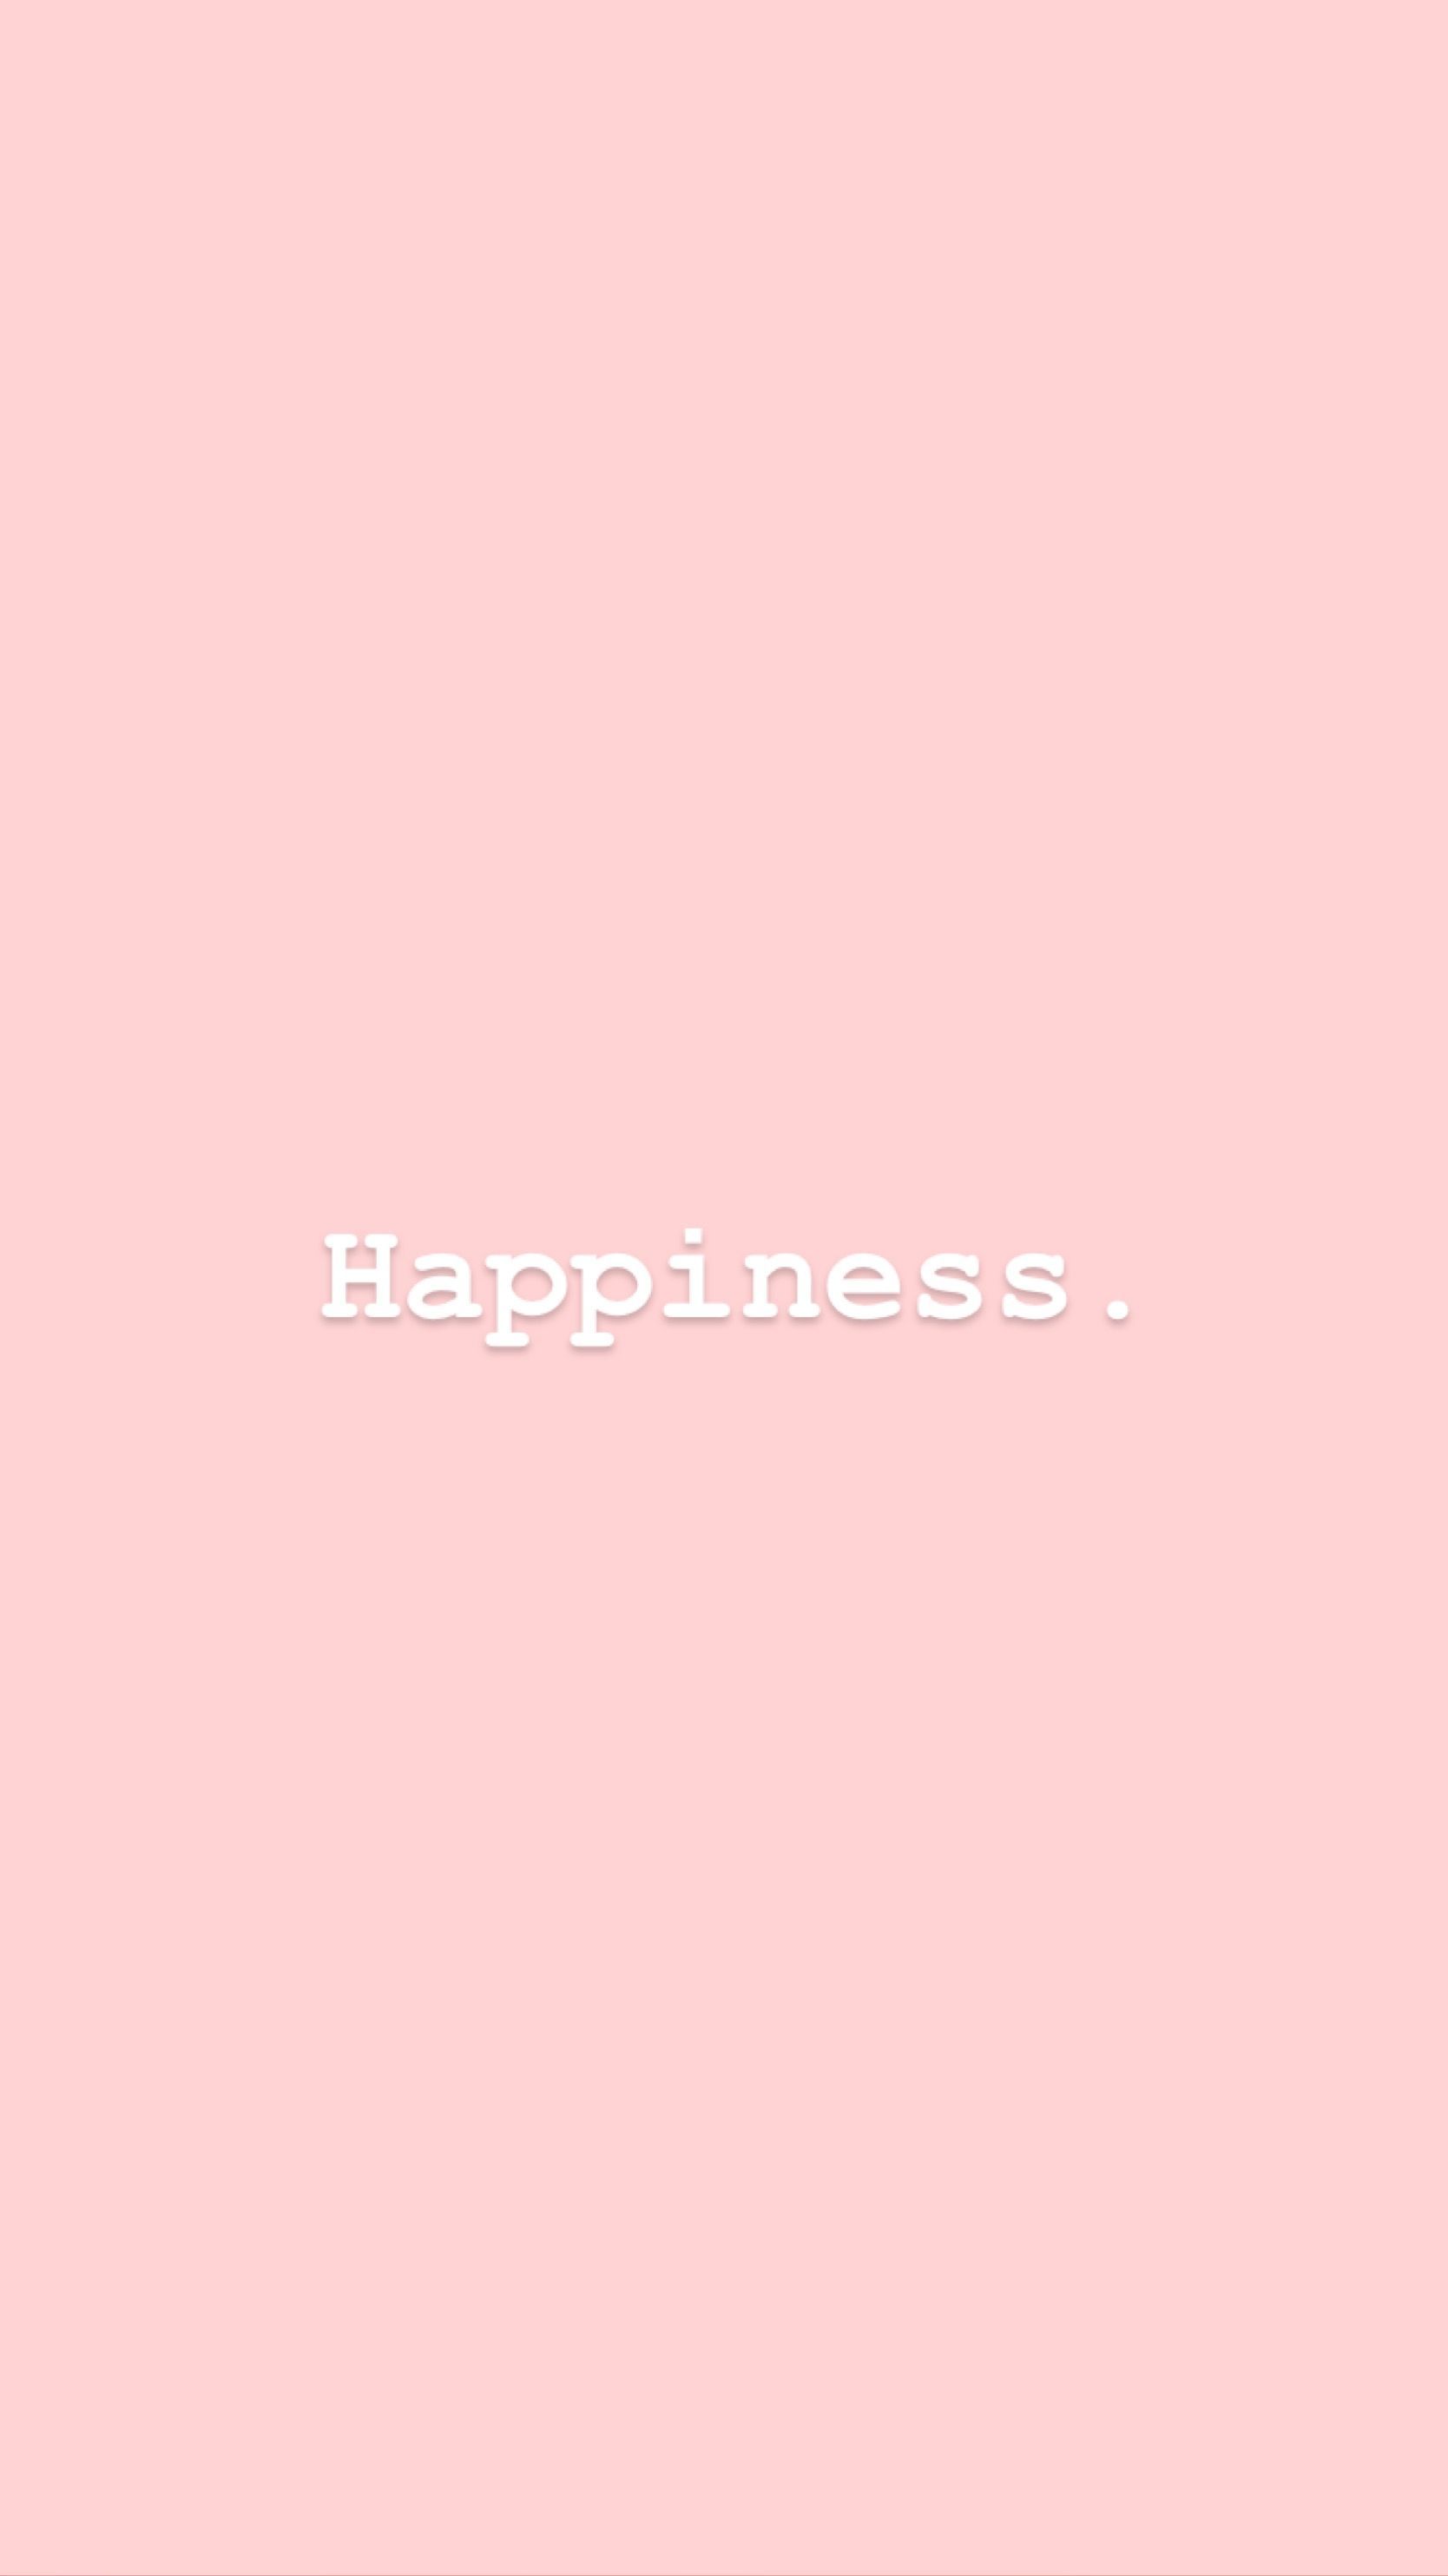 Aesthetic quotes pink wallpapers